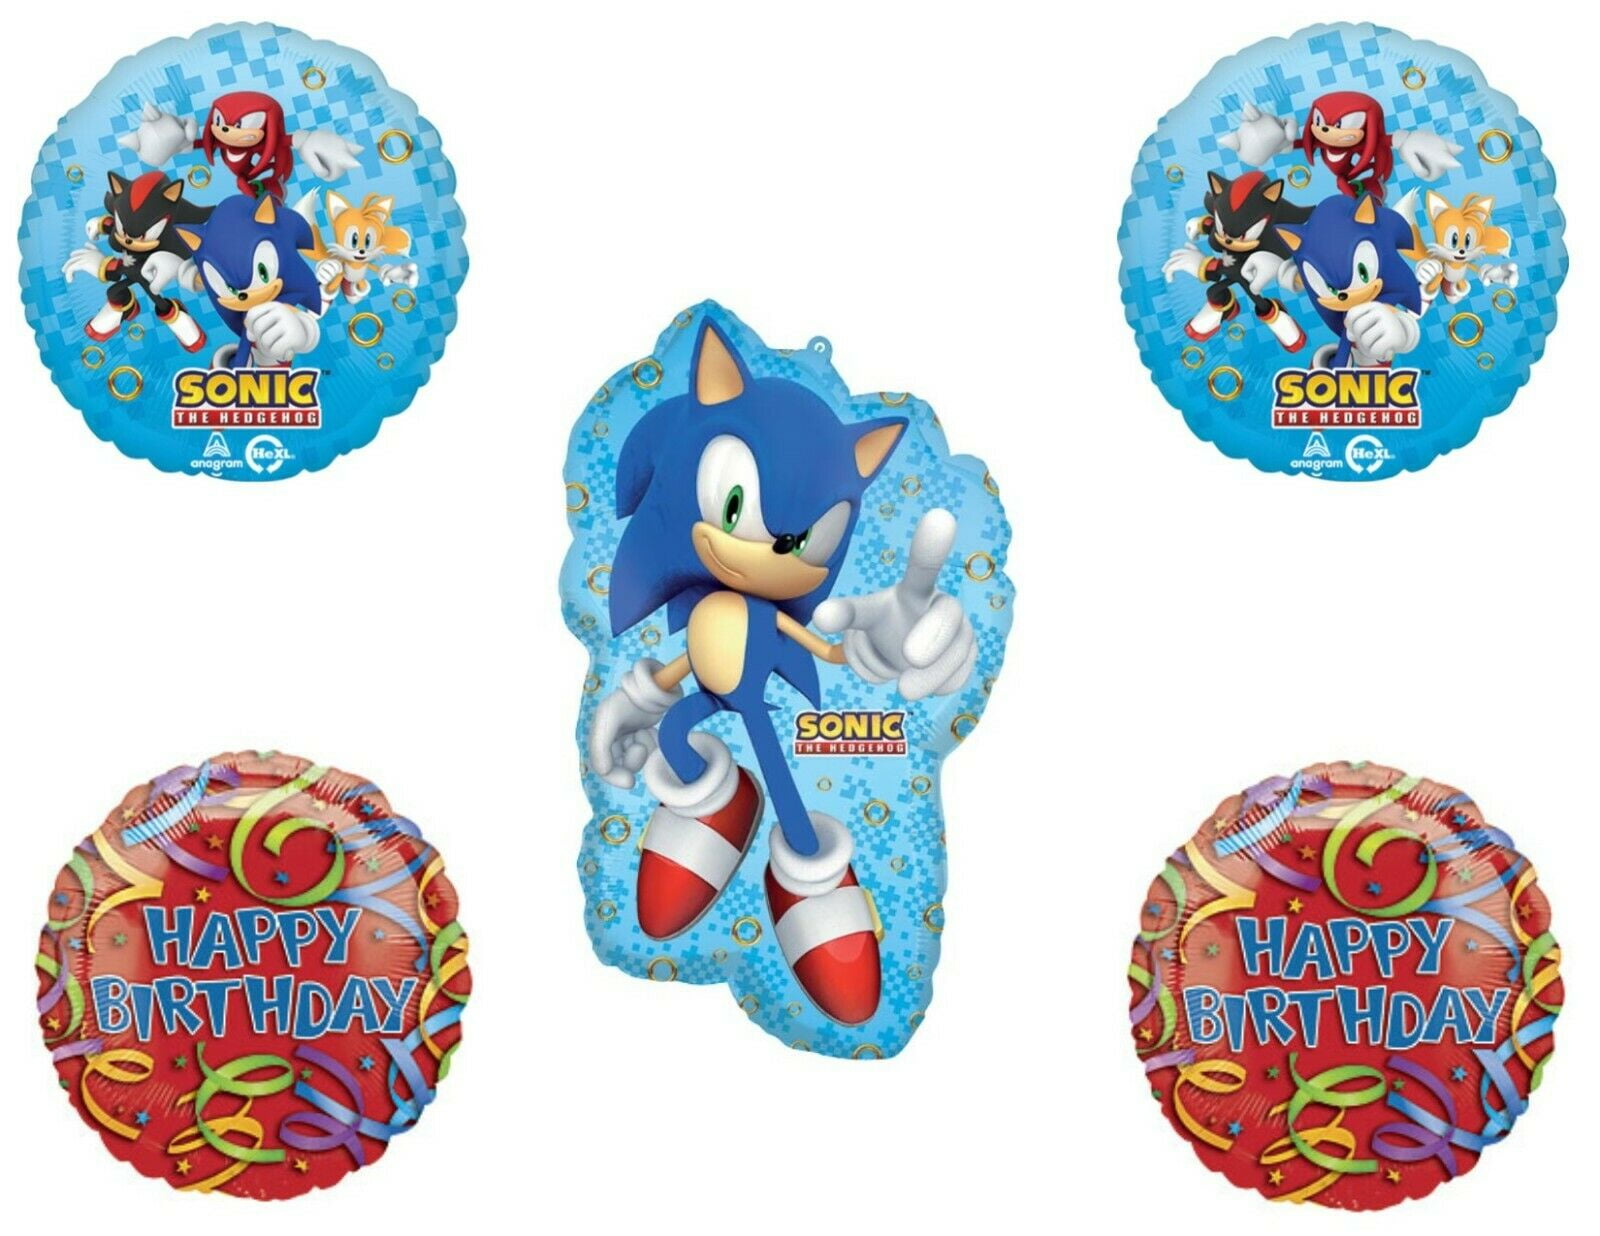 16PCS Sonic the Hedgehog Balloons Birthday Party Decorations Happy Birthday Banner Foil Balloon for Kids Baby Shower Birthday Party Suppliers